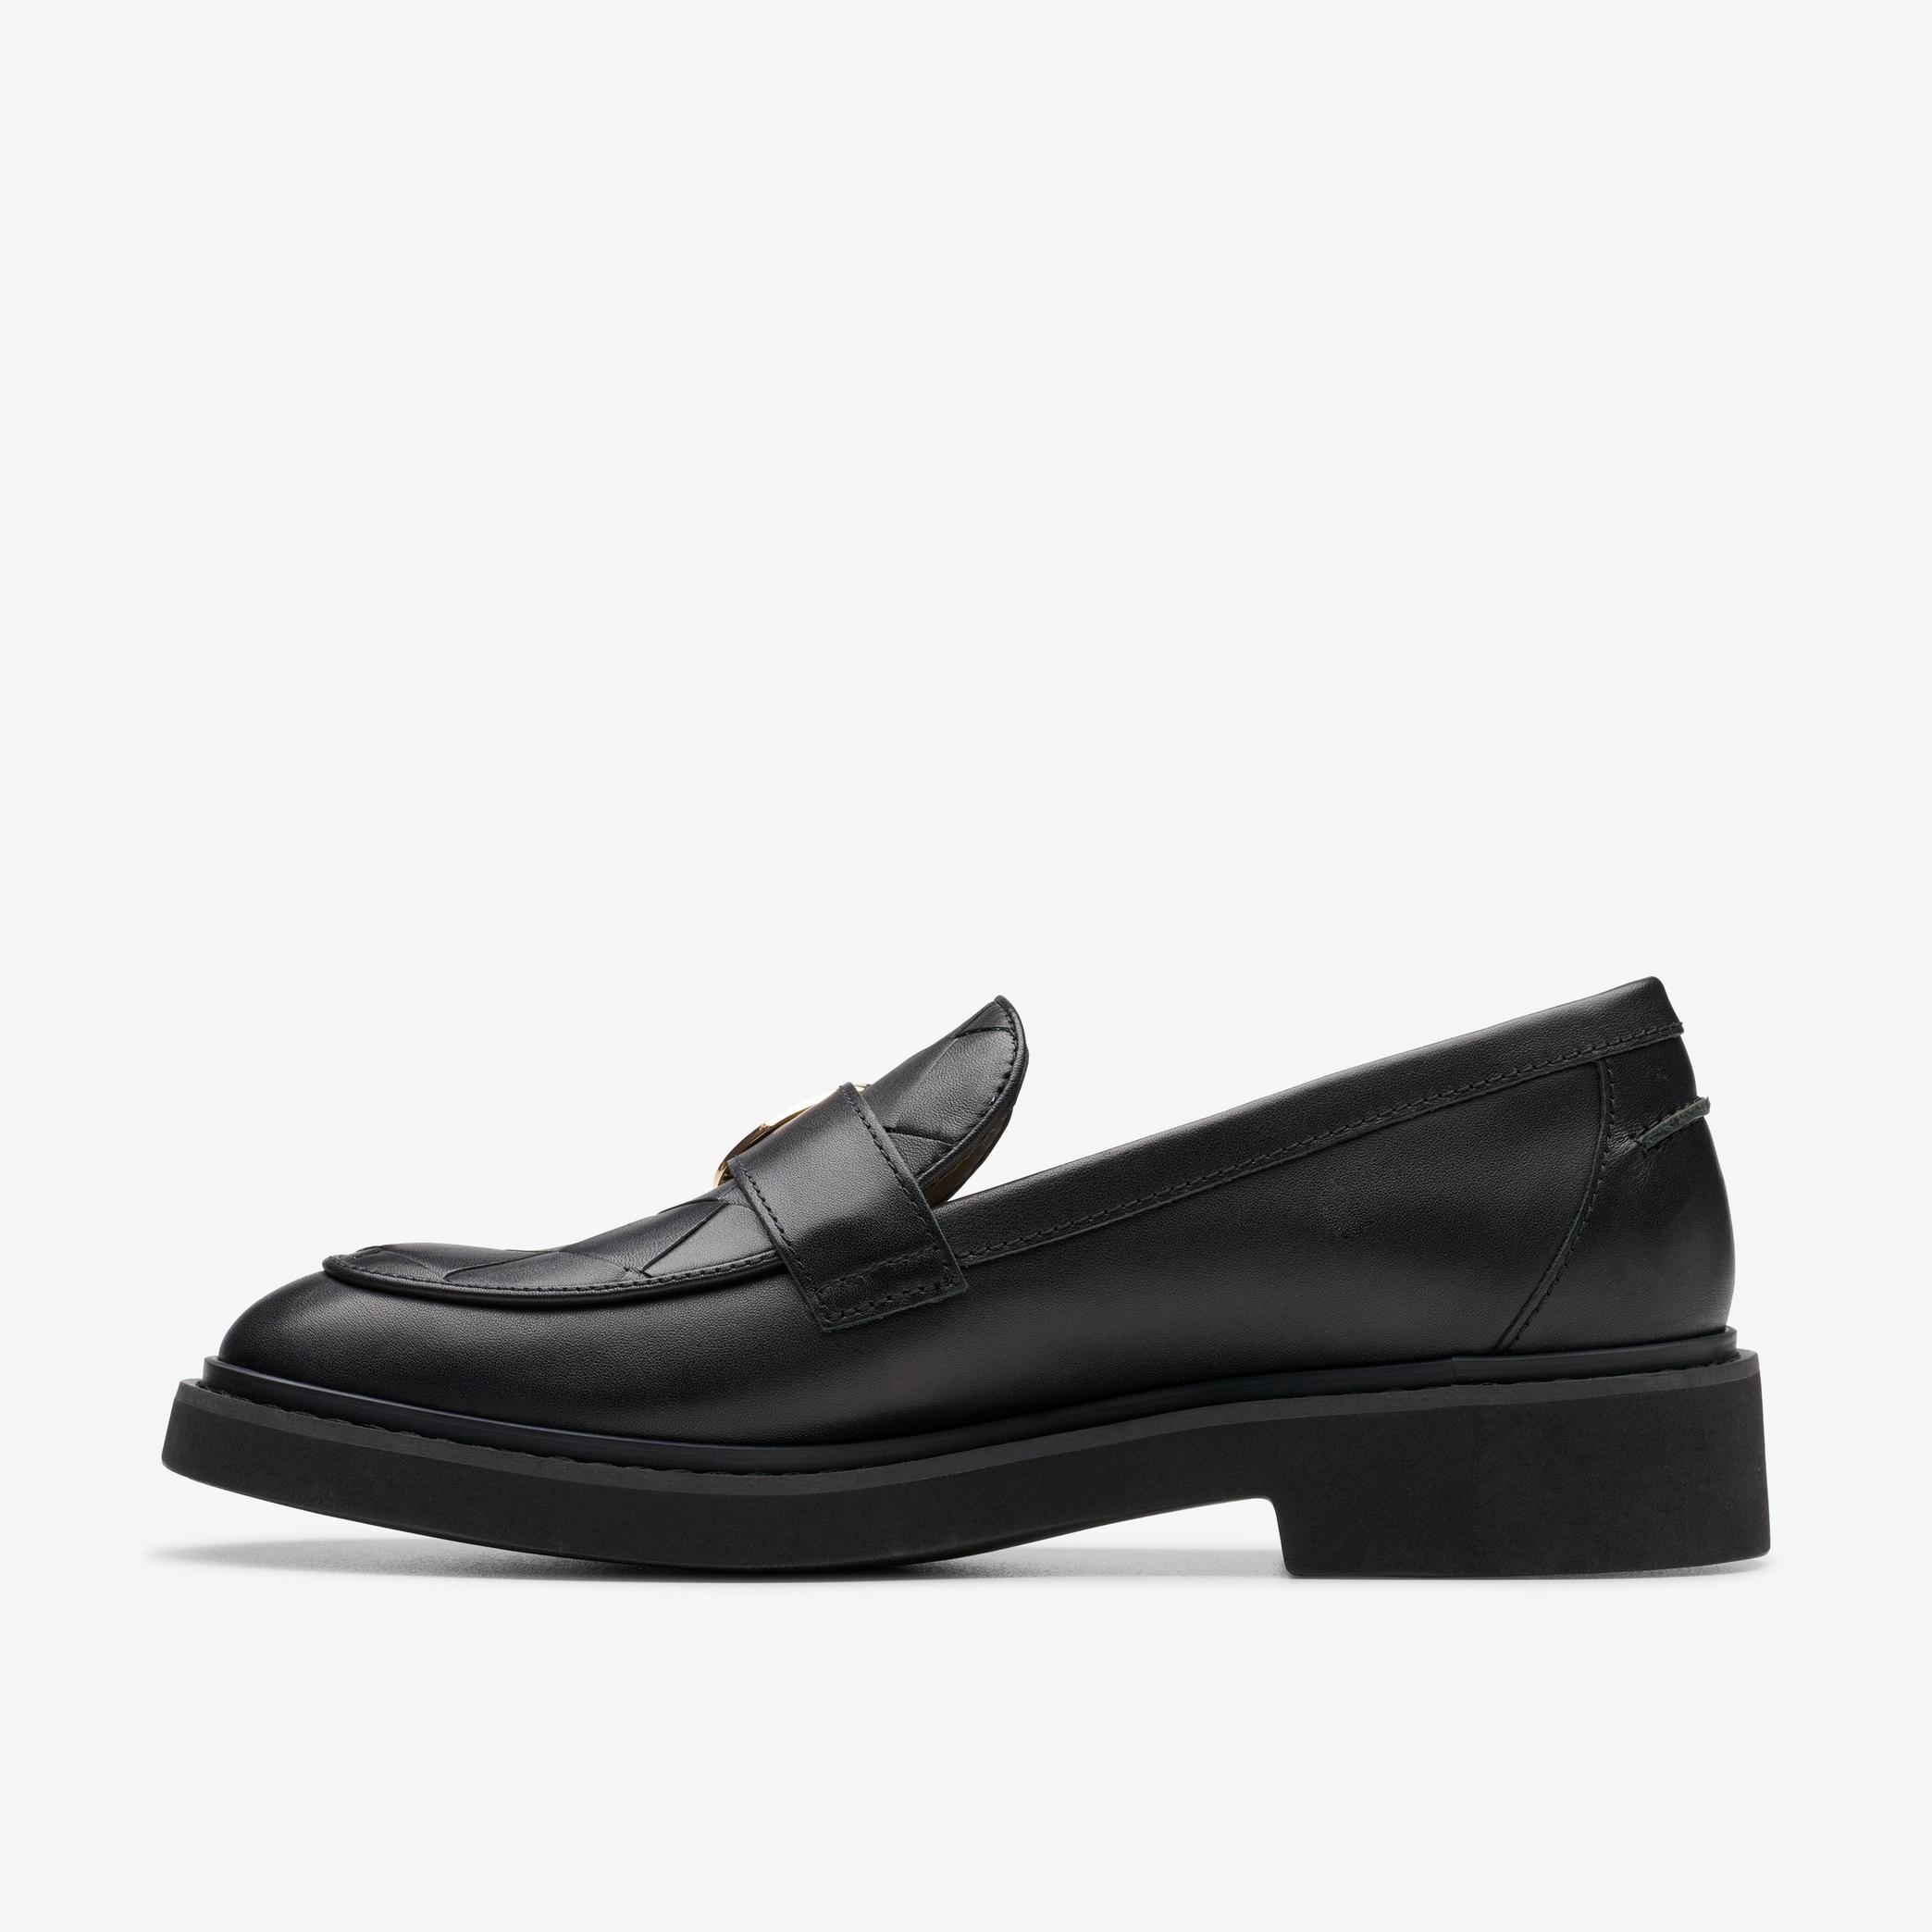 SPLEND PENNY Black Leather Loafers, view 2 of 6